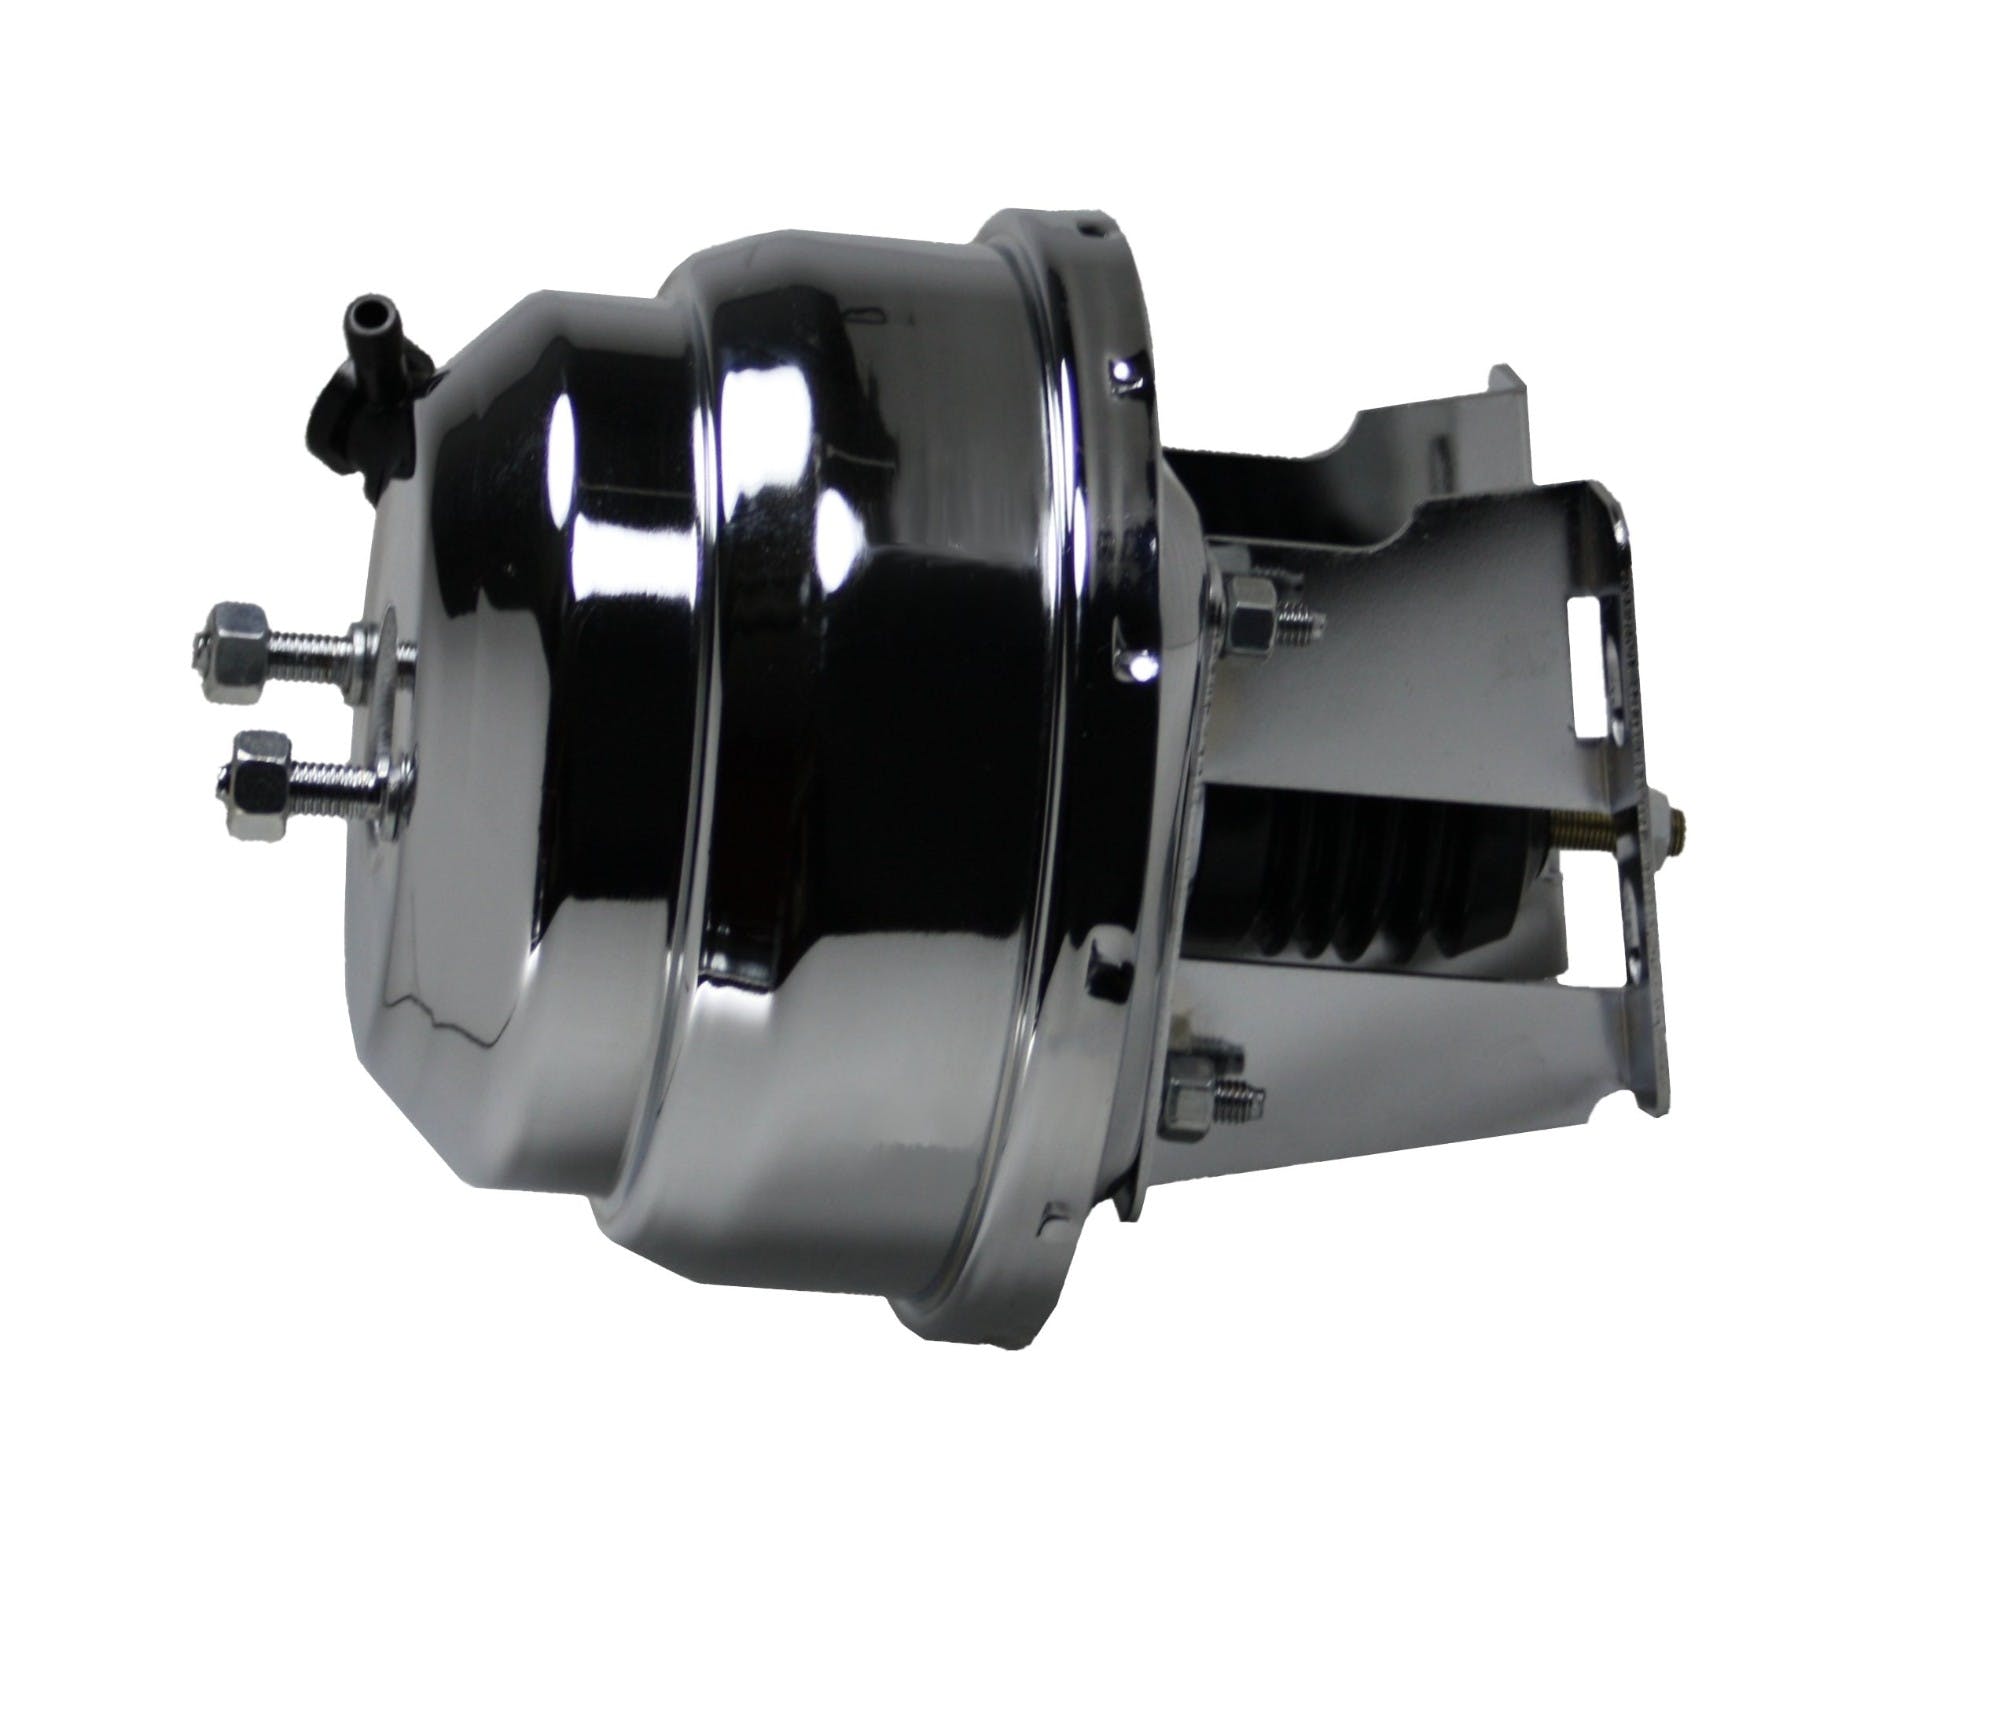 LEED Brakes 4V 8 in Dual Power Booster (Chrome)